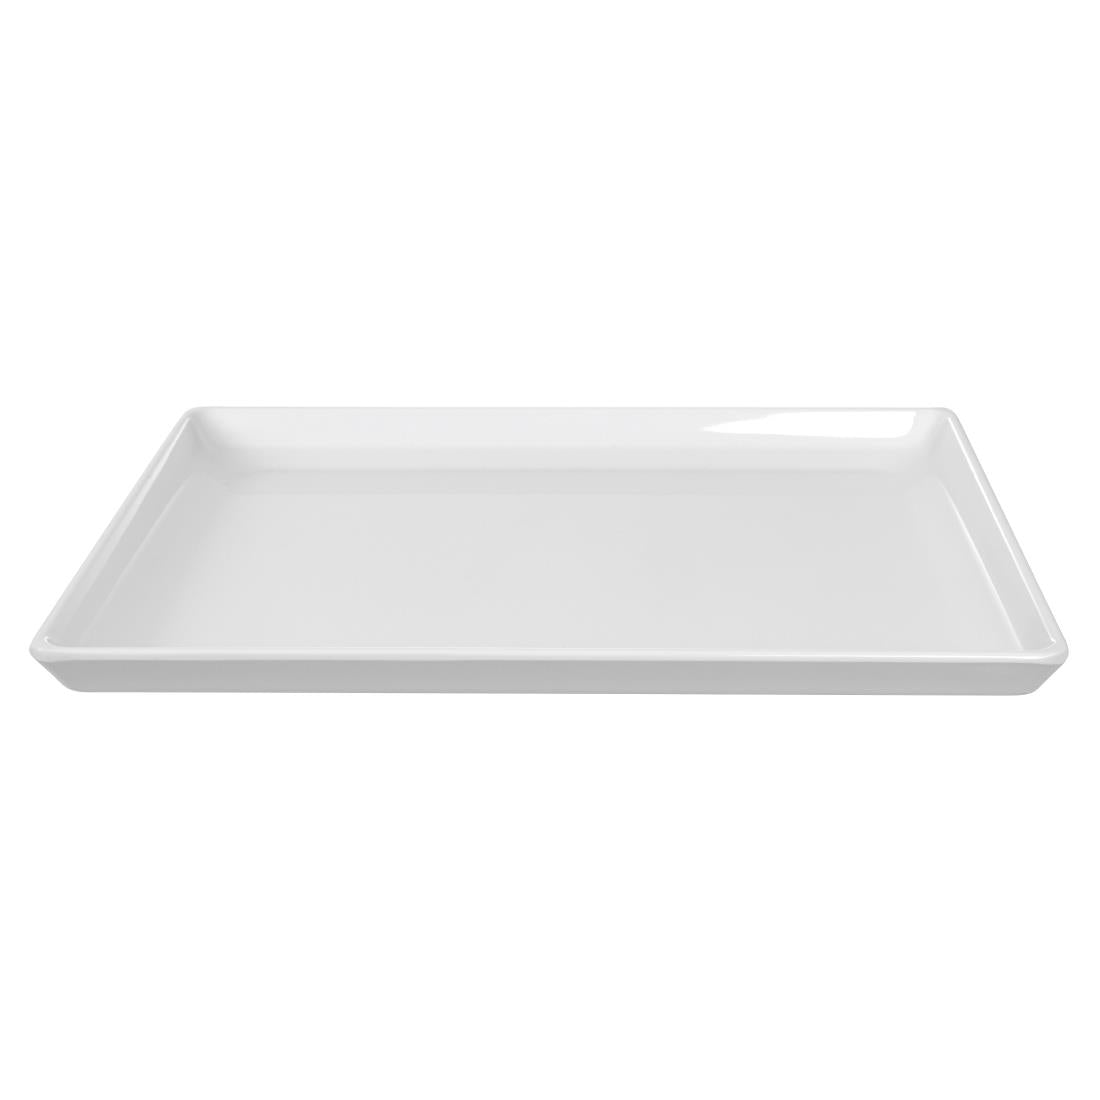 GF076 APS Float Melamine Tray White GN 1/2 JD Catering Equipment Solutions Ltd